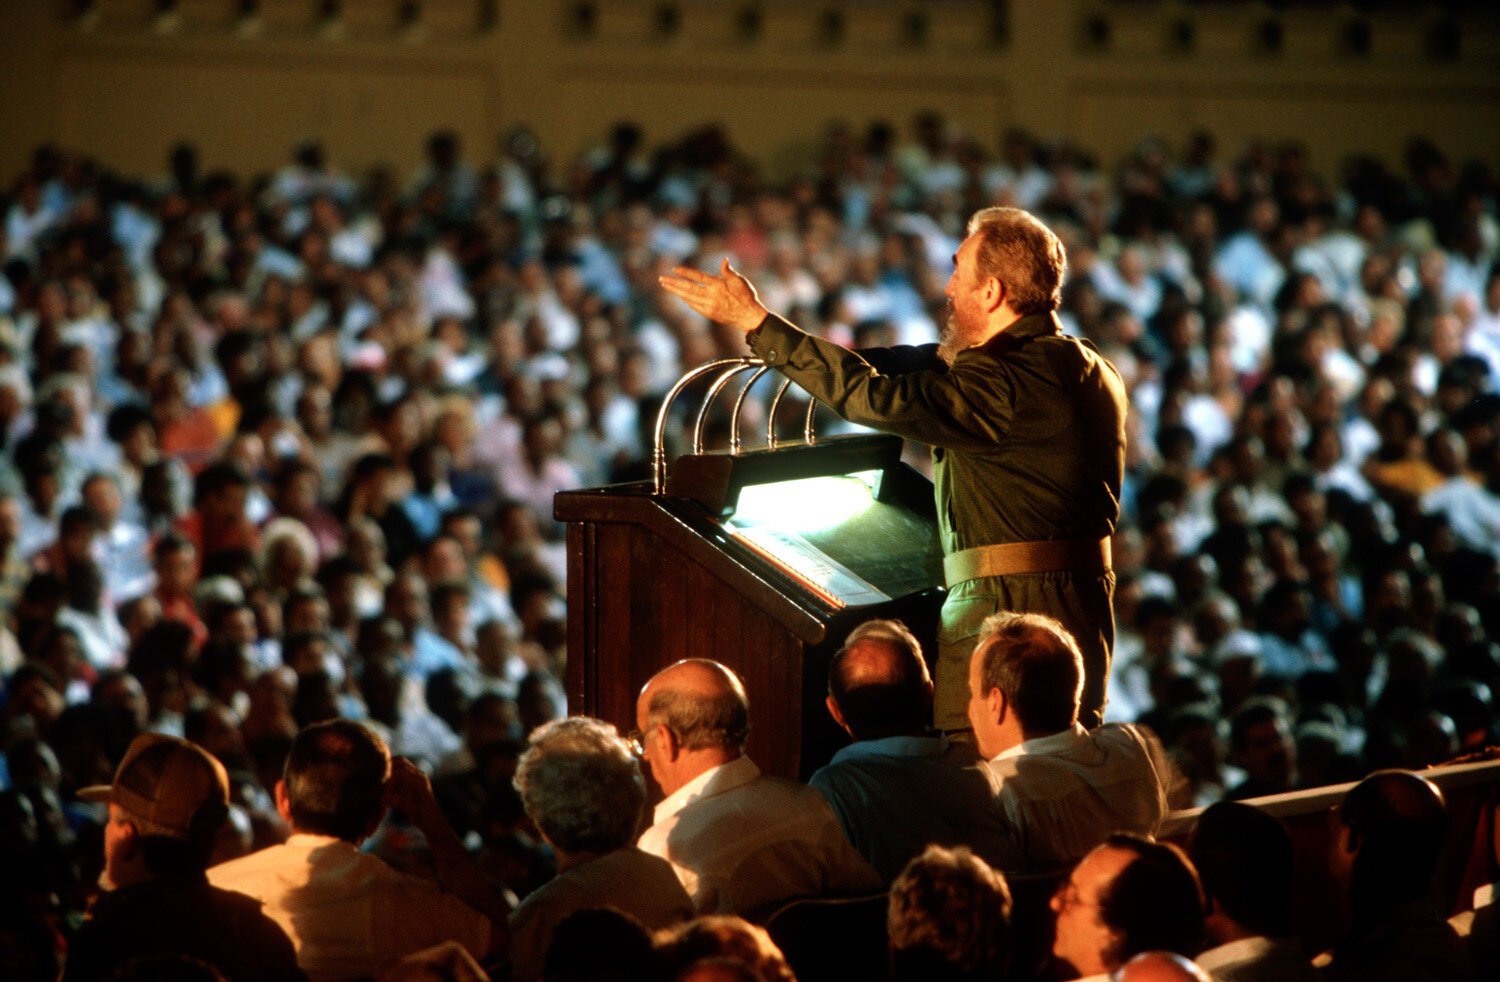  Fidel Castro, Cuba's head of State and Party, addresses the crowd during a ceremony on occaion of the 45th anniversary of the attack on the Moncada barracks, on  26.7.1998 in Santiago de Cuba. 